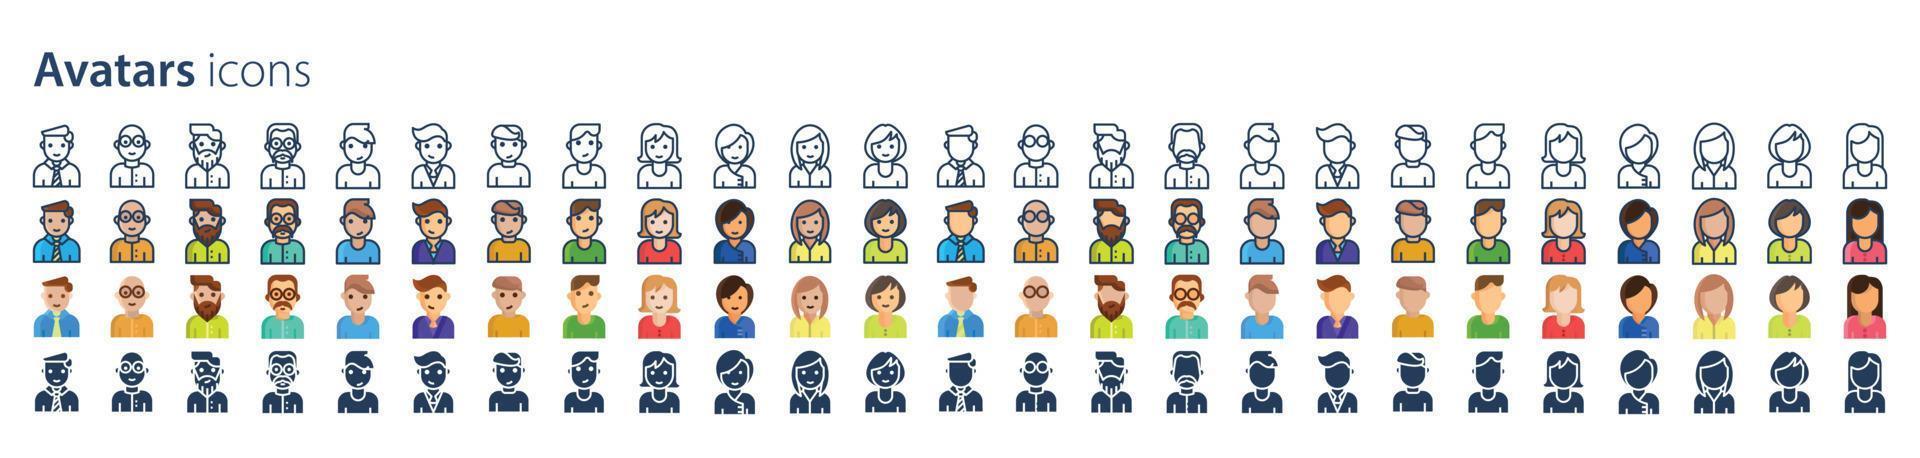 Collection of icons related to Avatar and user profile, including icons like Man, woman, girl, boy and more. vector illustrations, Pixel Perfect